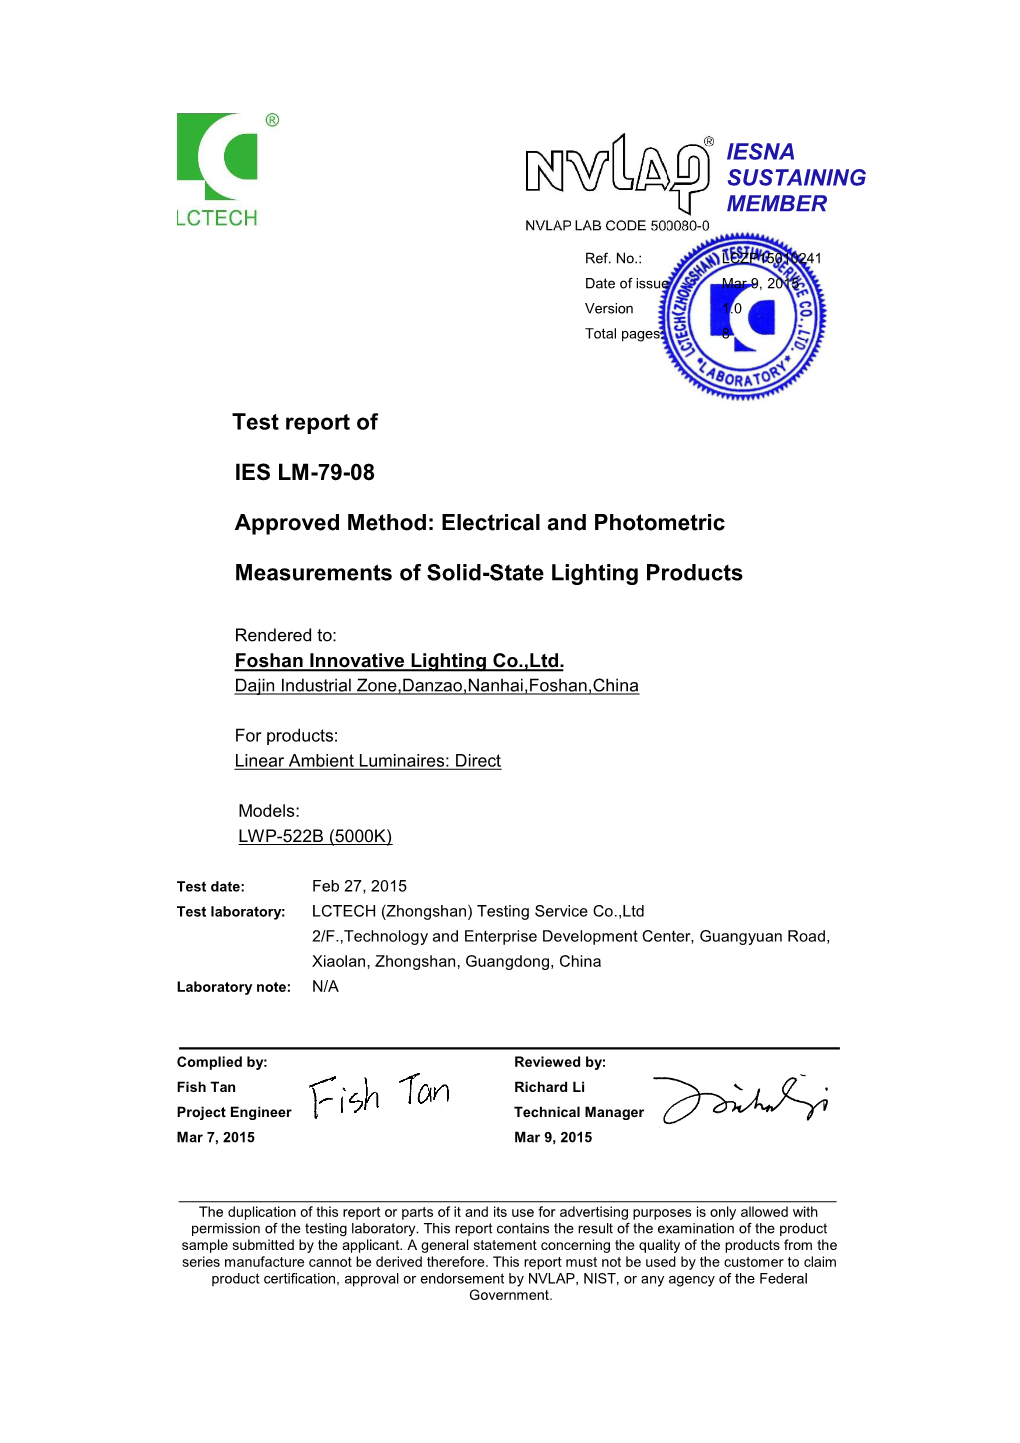 IESNA SUSTAINING MEMBER Test Report of IES LM-79-08 Approved